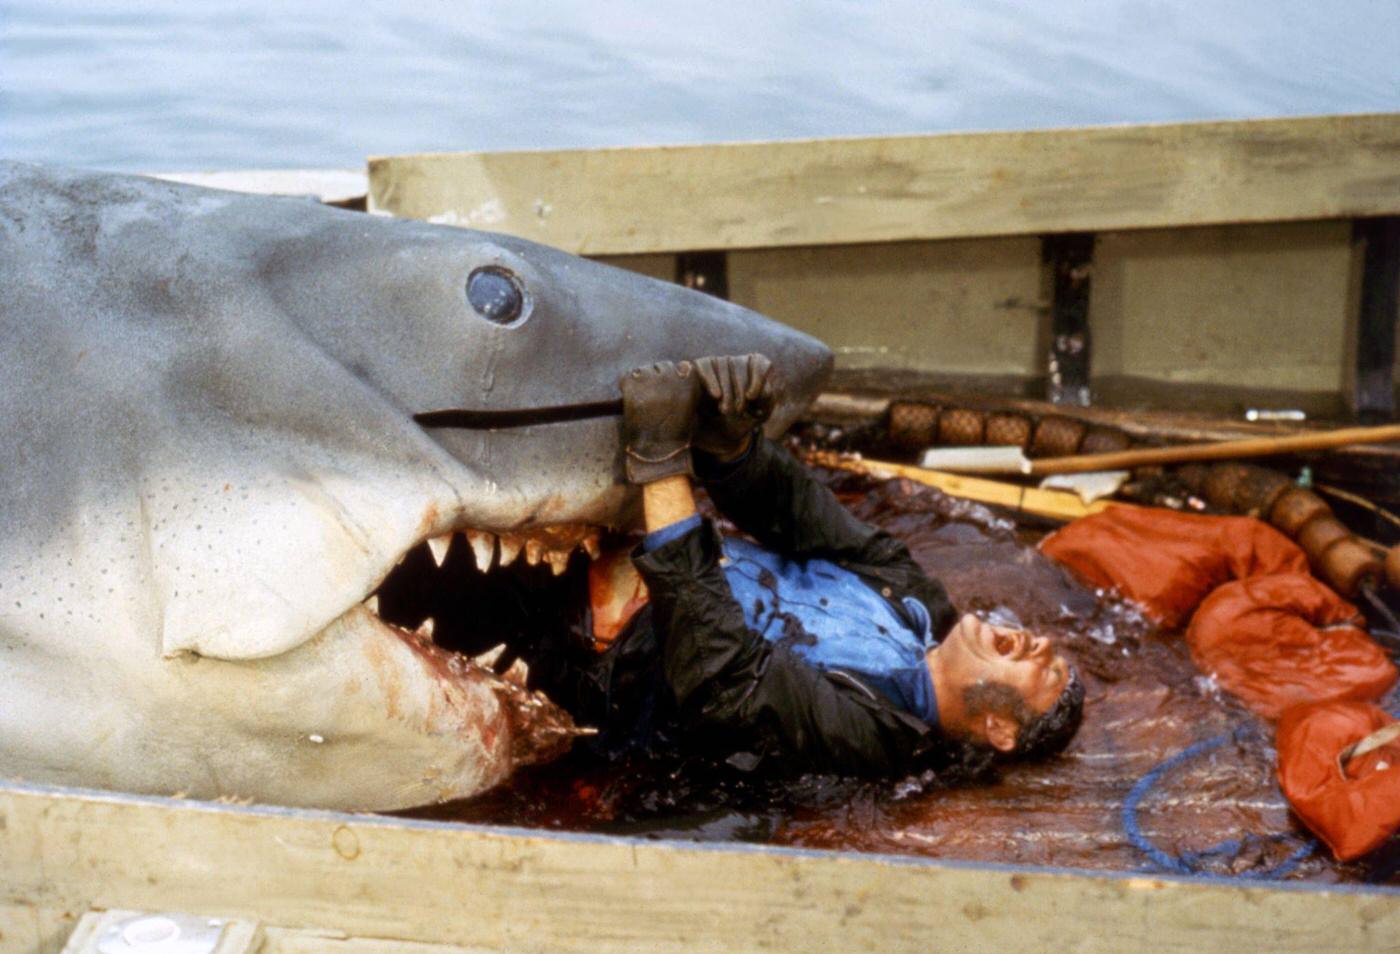 British actor Robert Shaw on the set of Jaws, directed by Steven Spielberg.